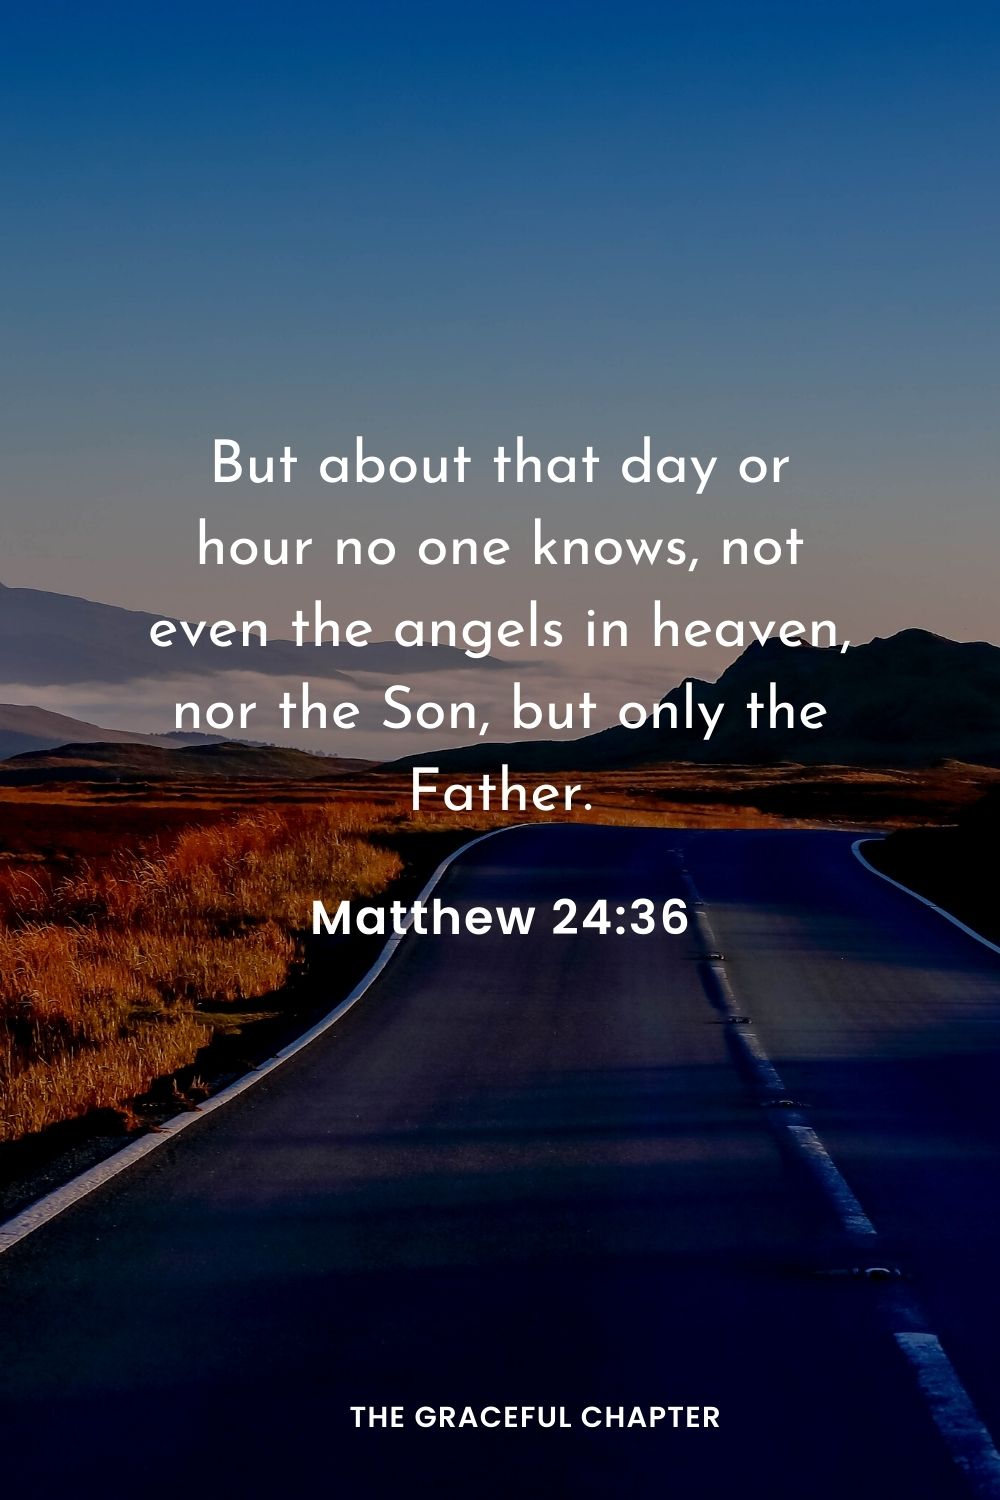 But about that day or hour no one knows, not even the angels in heaven, nor the Son, but only the Father.